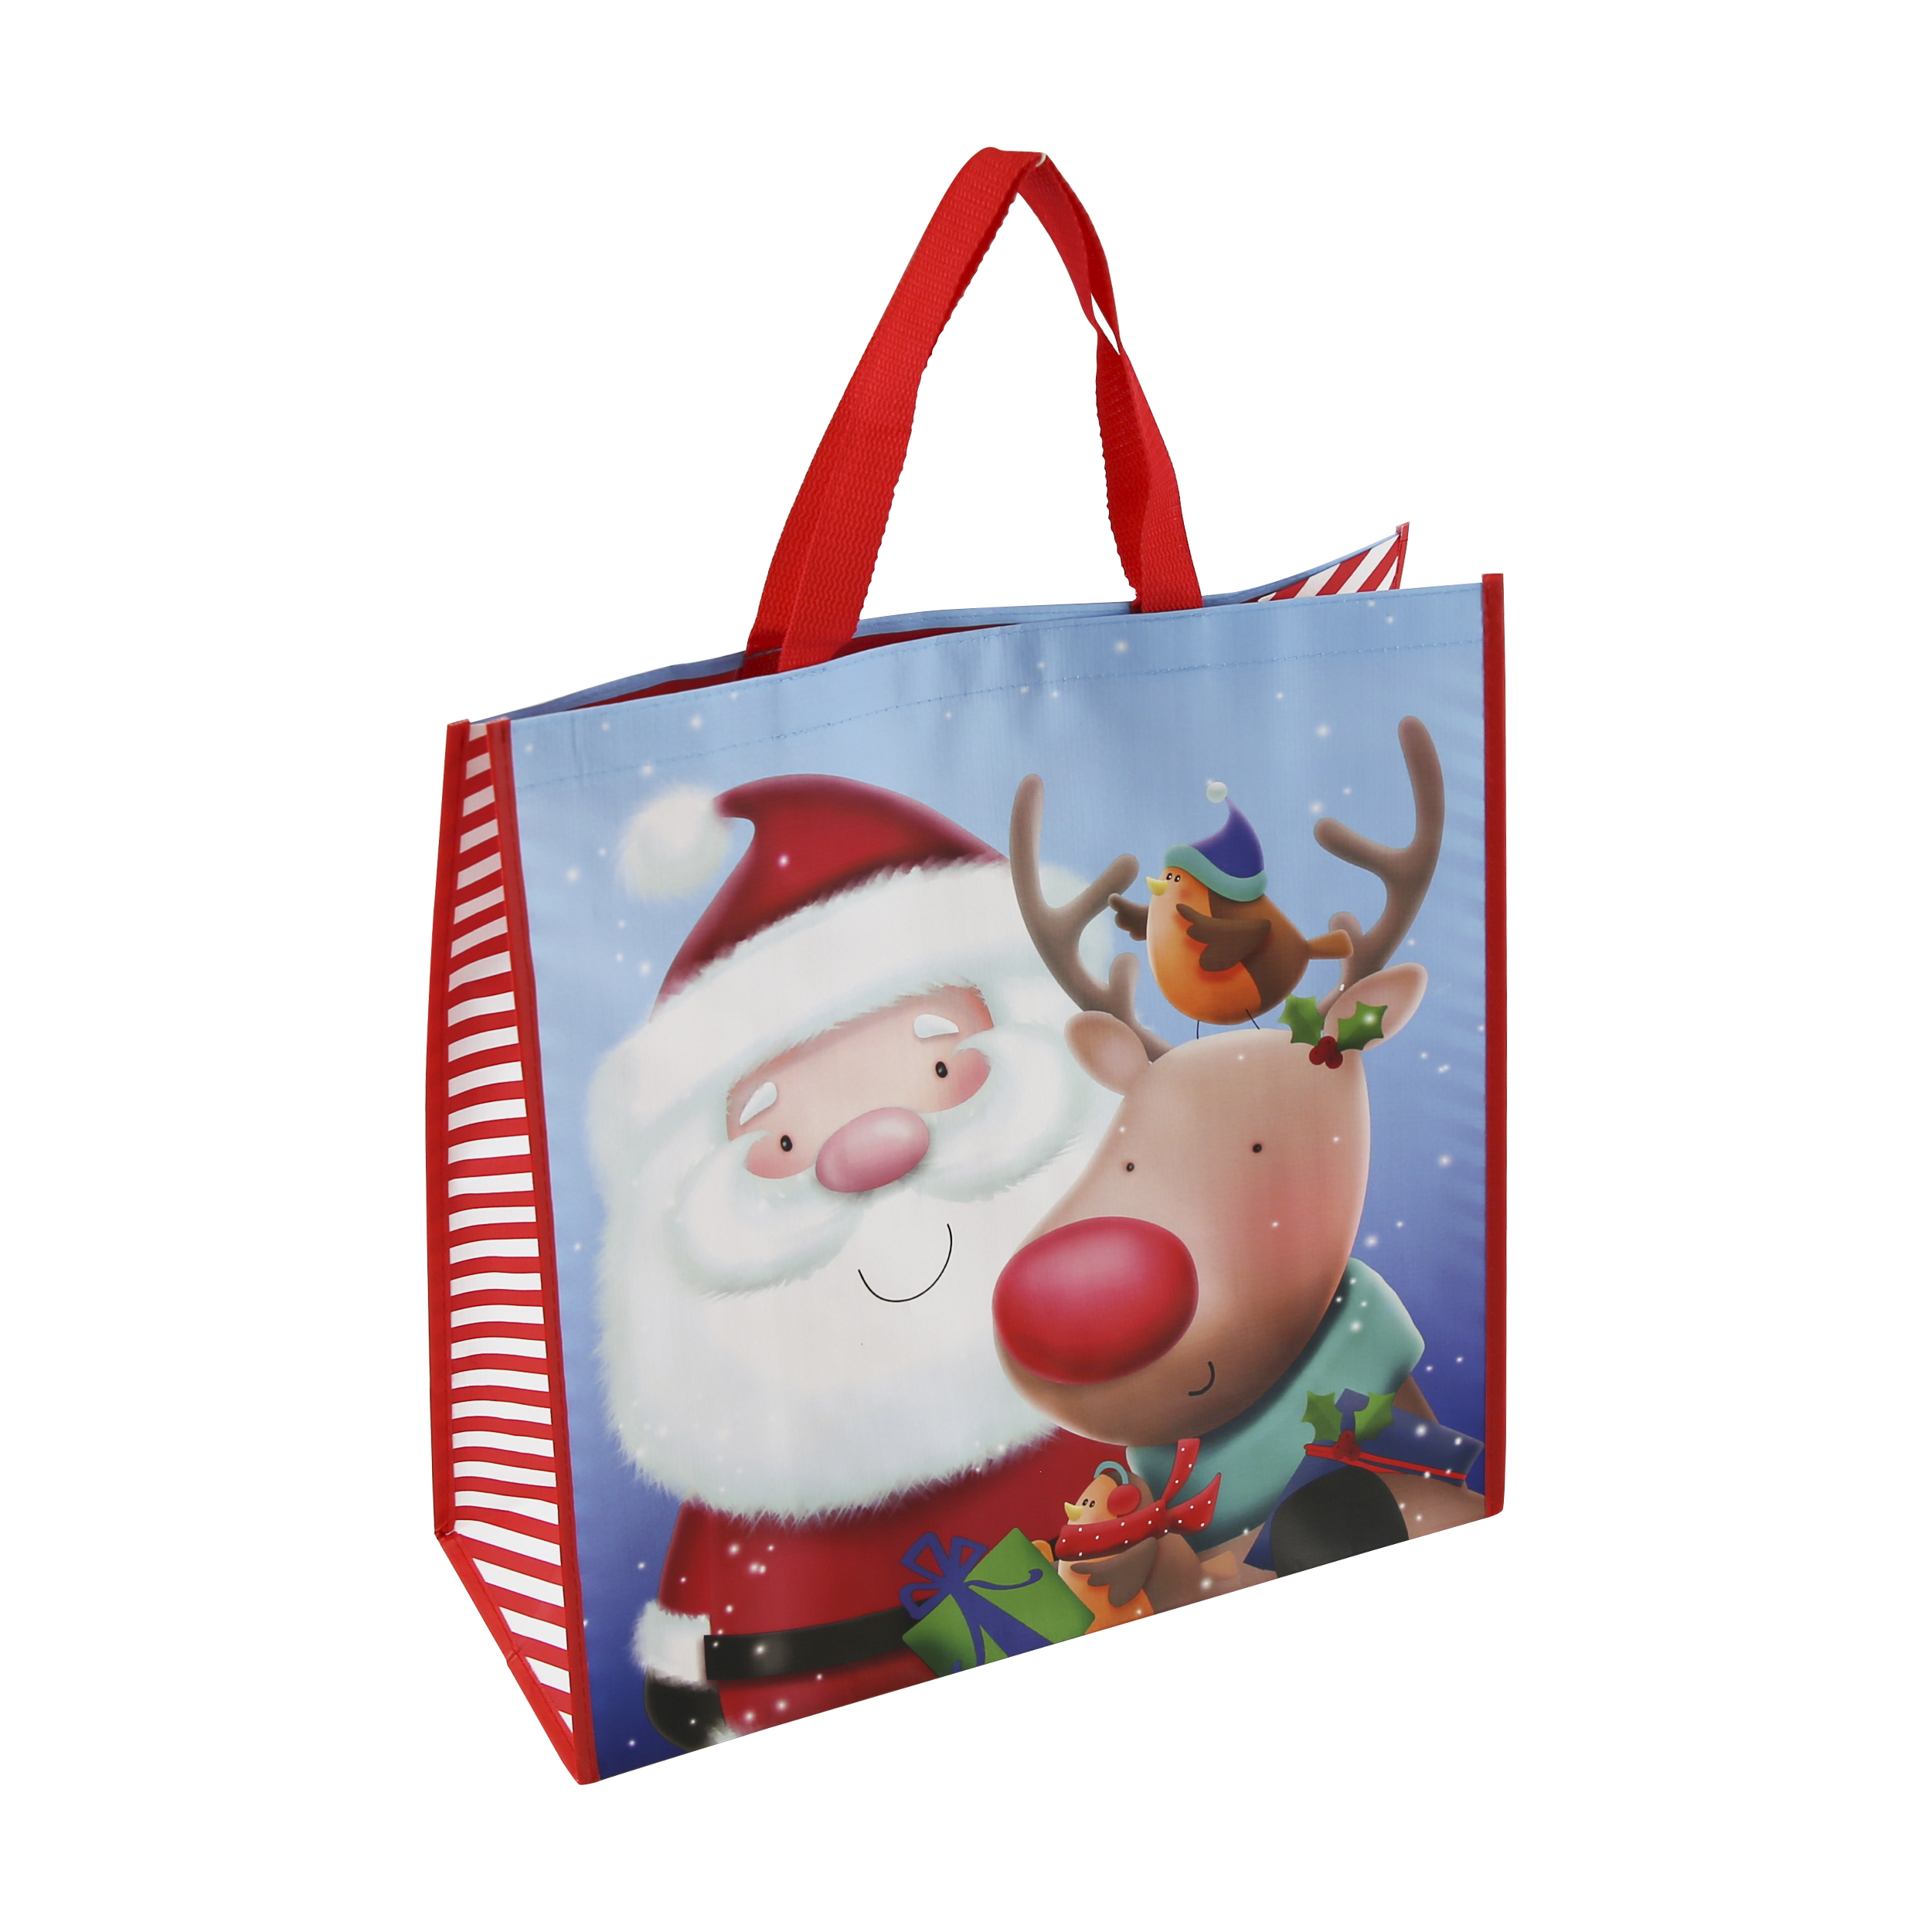 Santa Sacks Personalized Canvas Santa Bags Kids Christmas Gift Large  Christmas Bags With Drawstring For Christmas Decoration In Size 19.5x27.5  inches(Checked): Buy Online at Best Price in Egypt - Souq is now